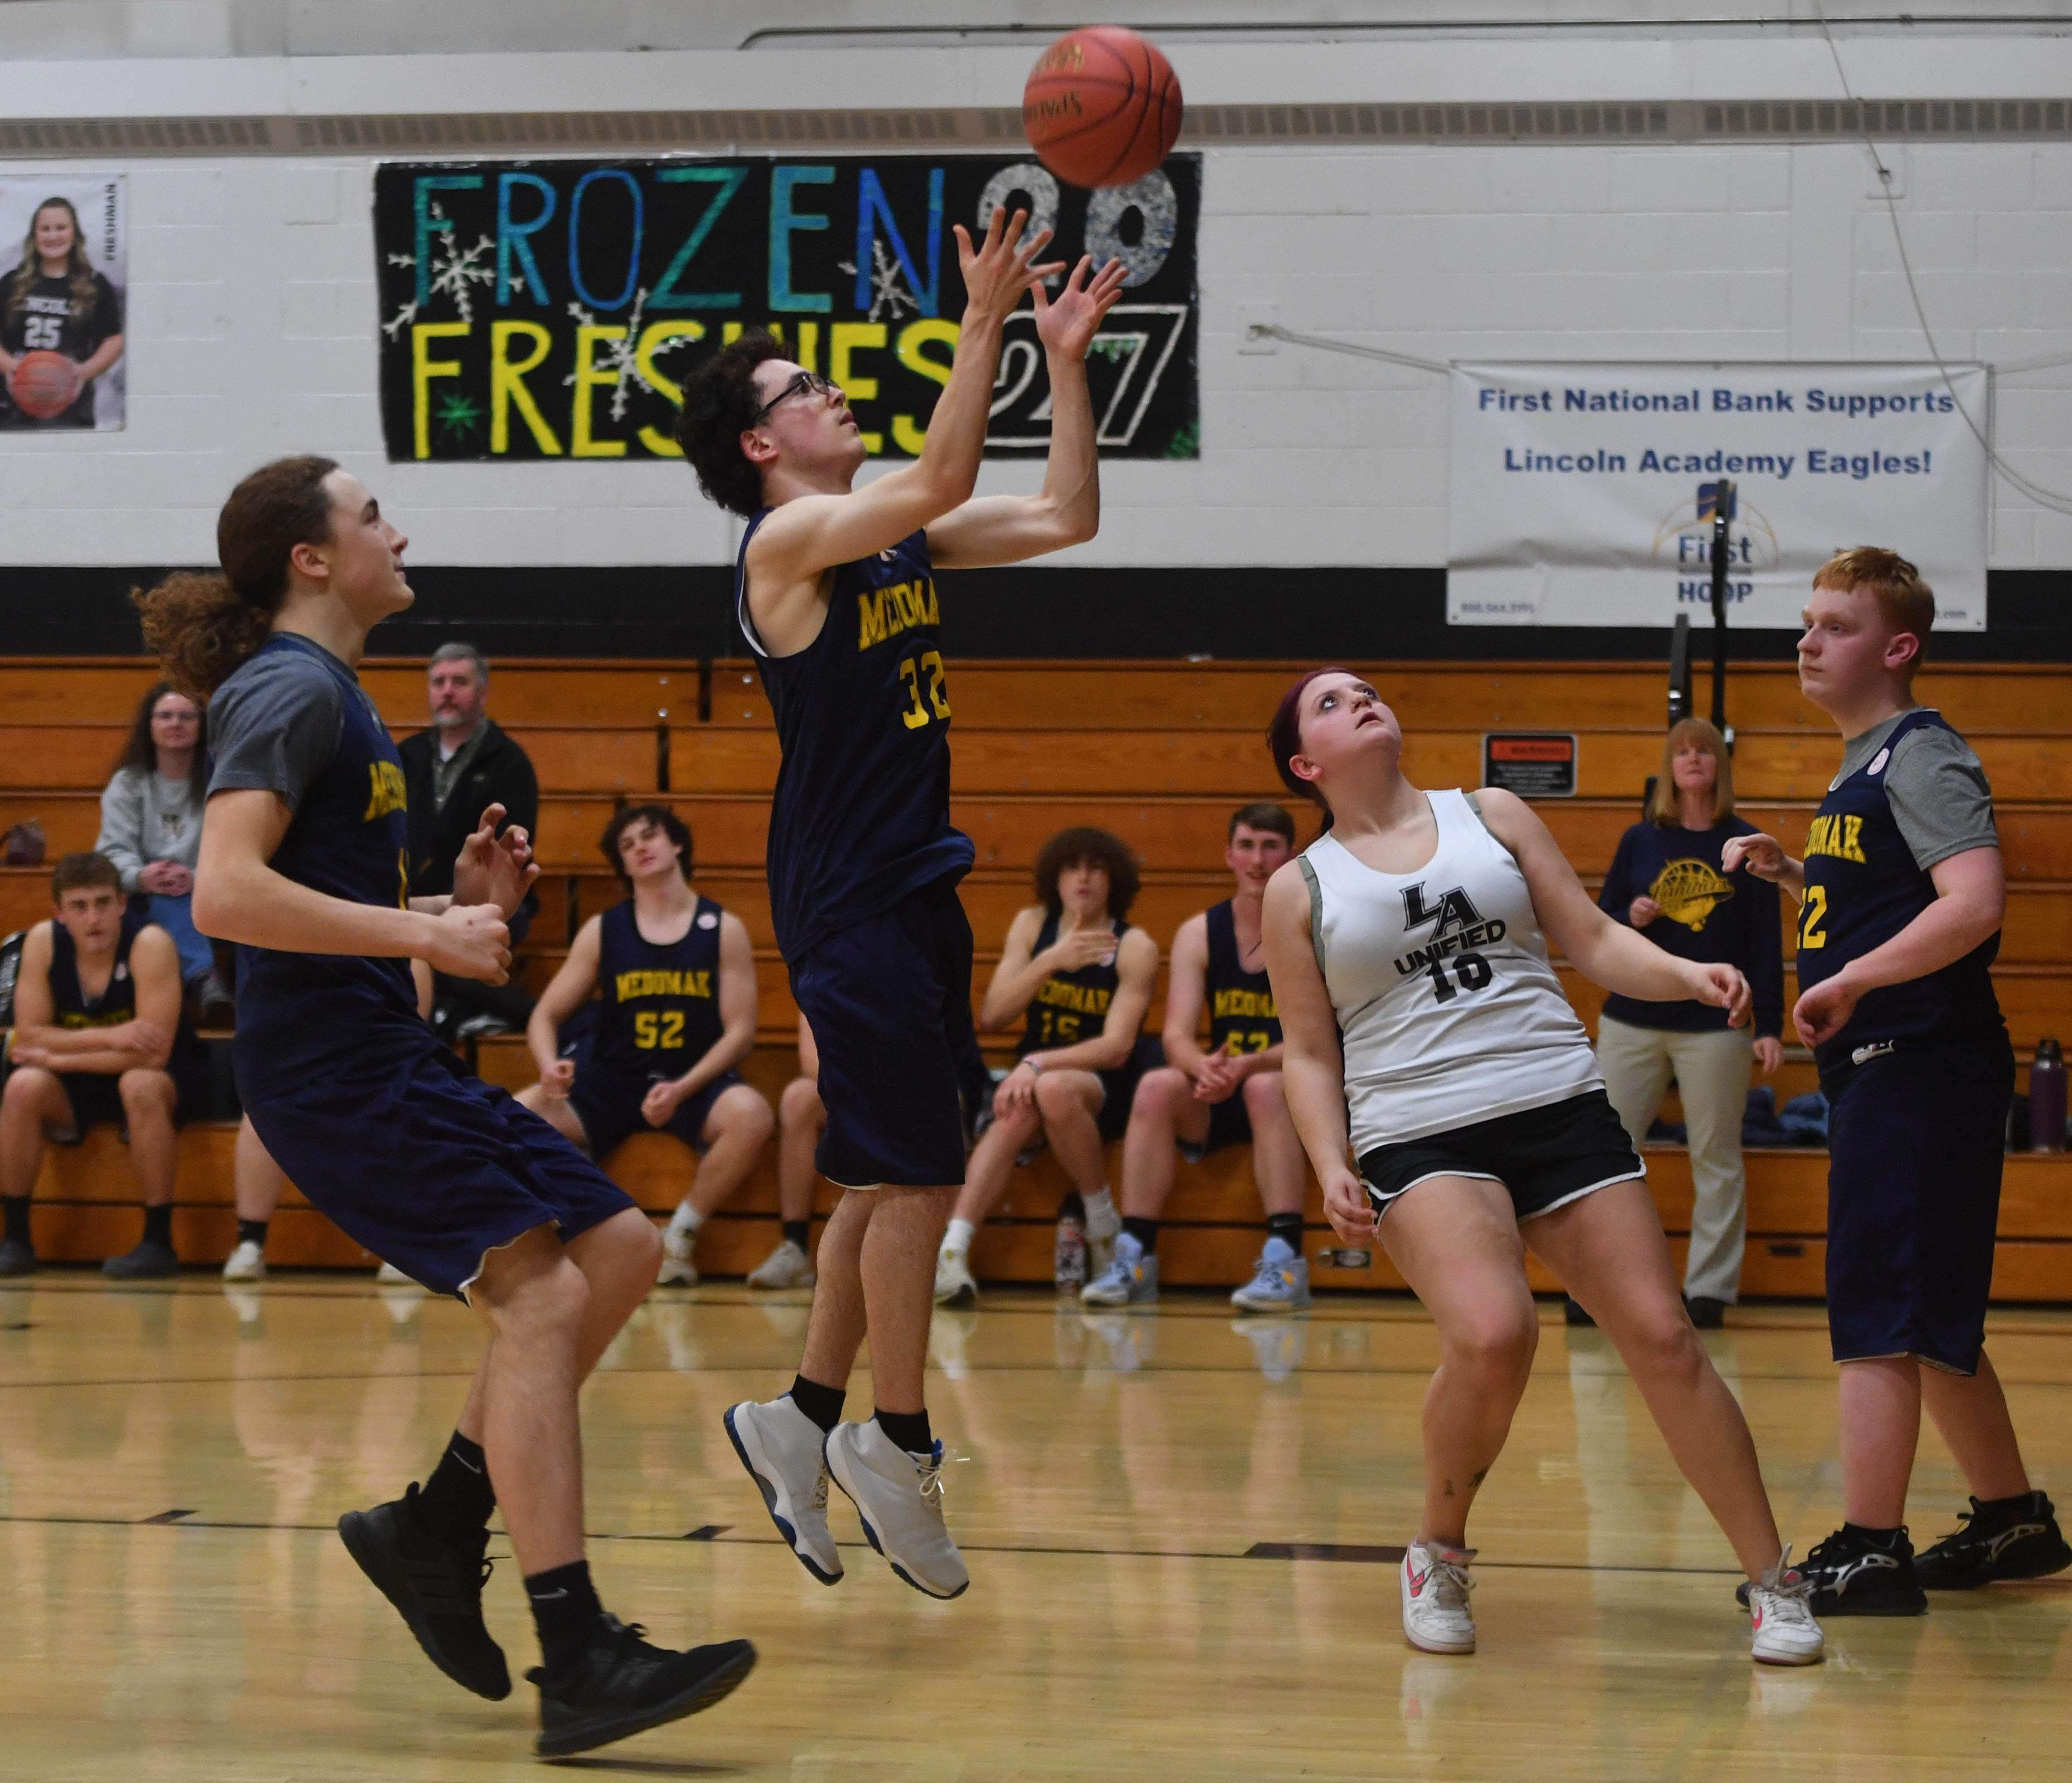 Joey Vargas shoots the ball for the Medomak Valley unified basketball team while Lincoln Academy's Kaylee Sidelinger prepares for a rebound. (Mic LeBel photo)